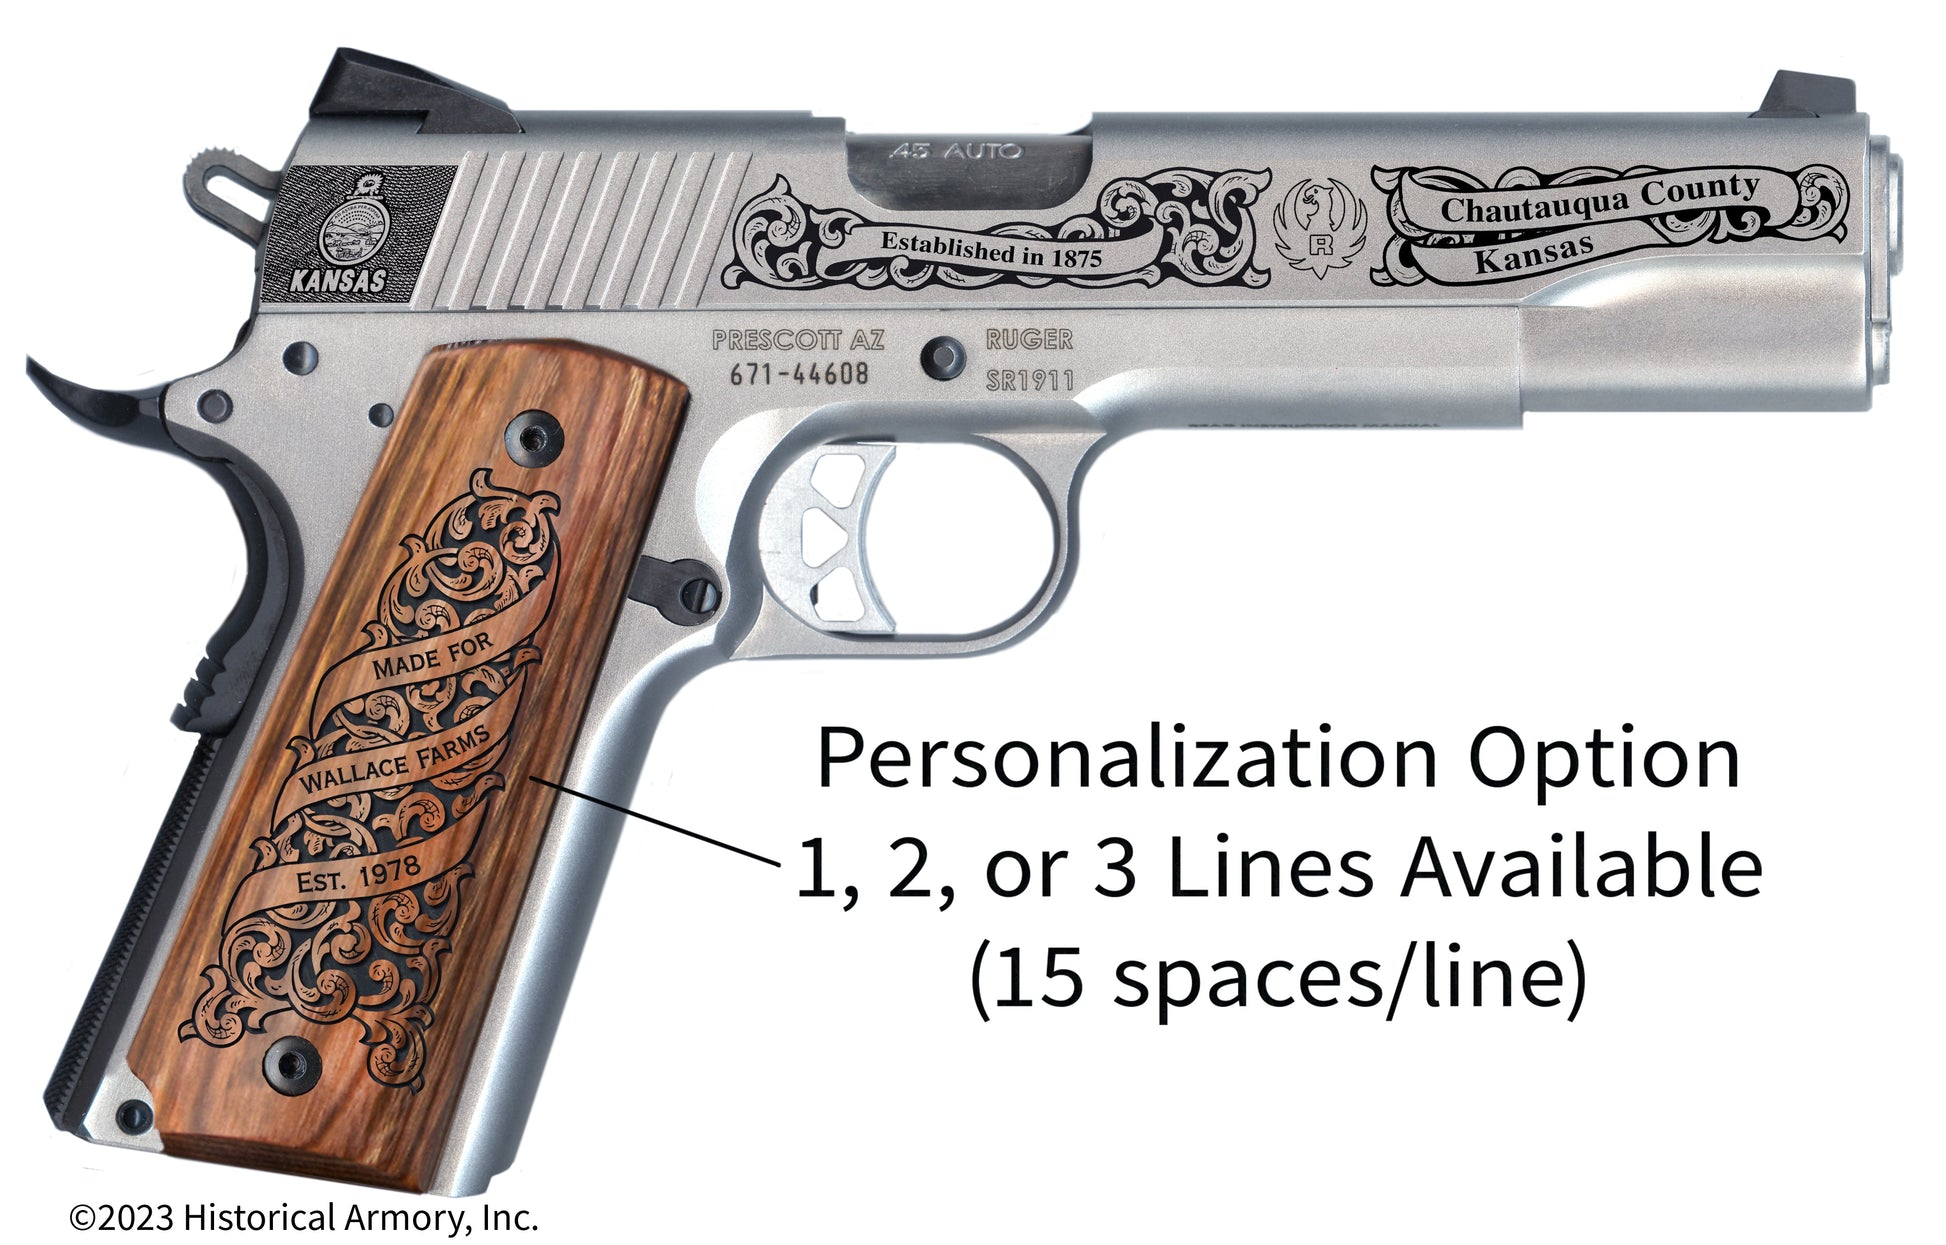 Chautauqua County Kansas Personalized Engraved .45 Auto Ruger 1911